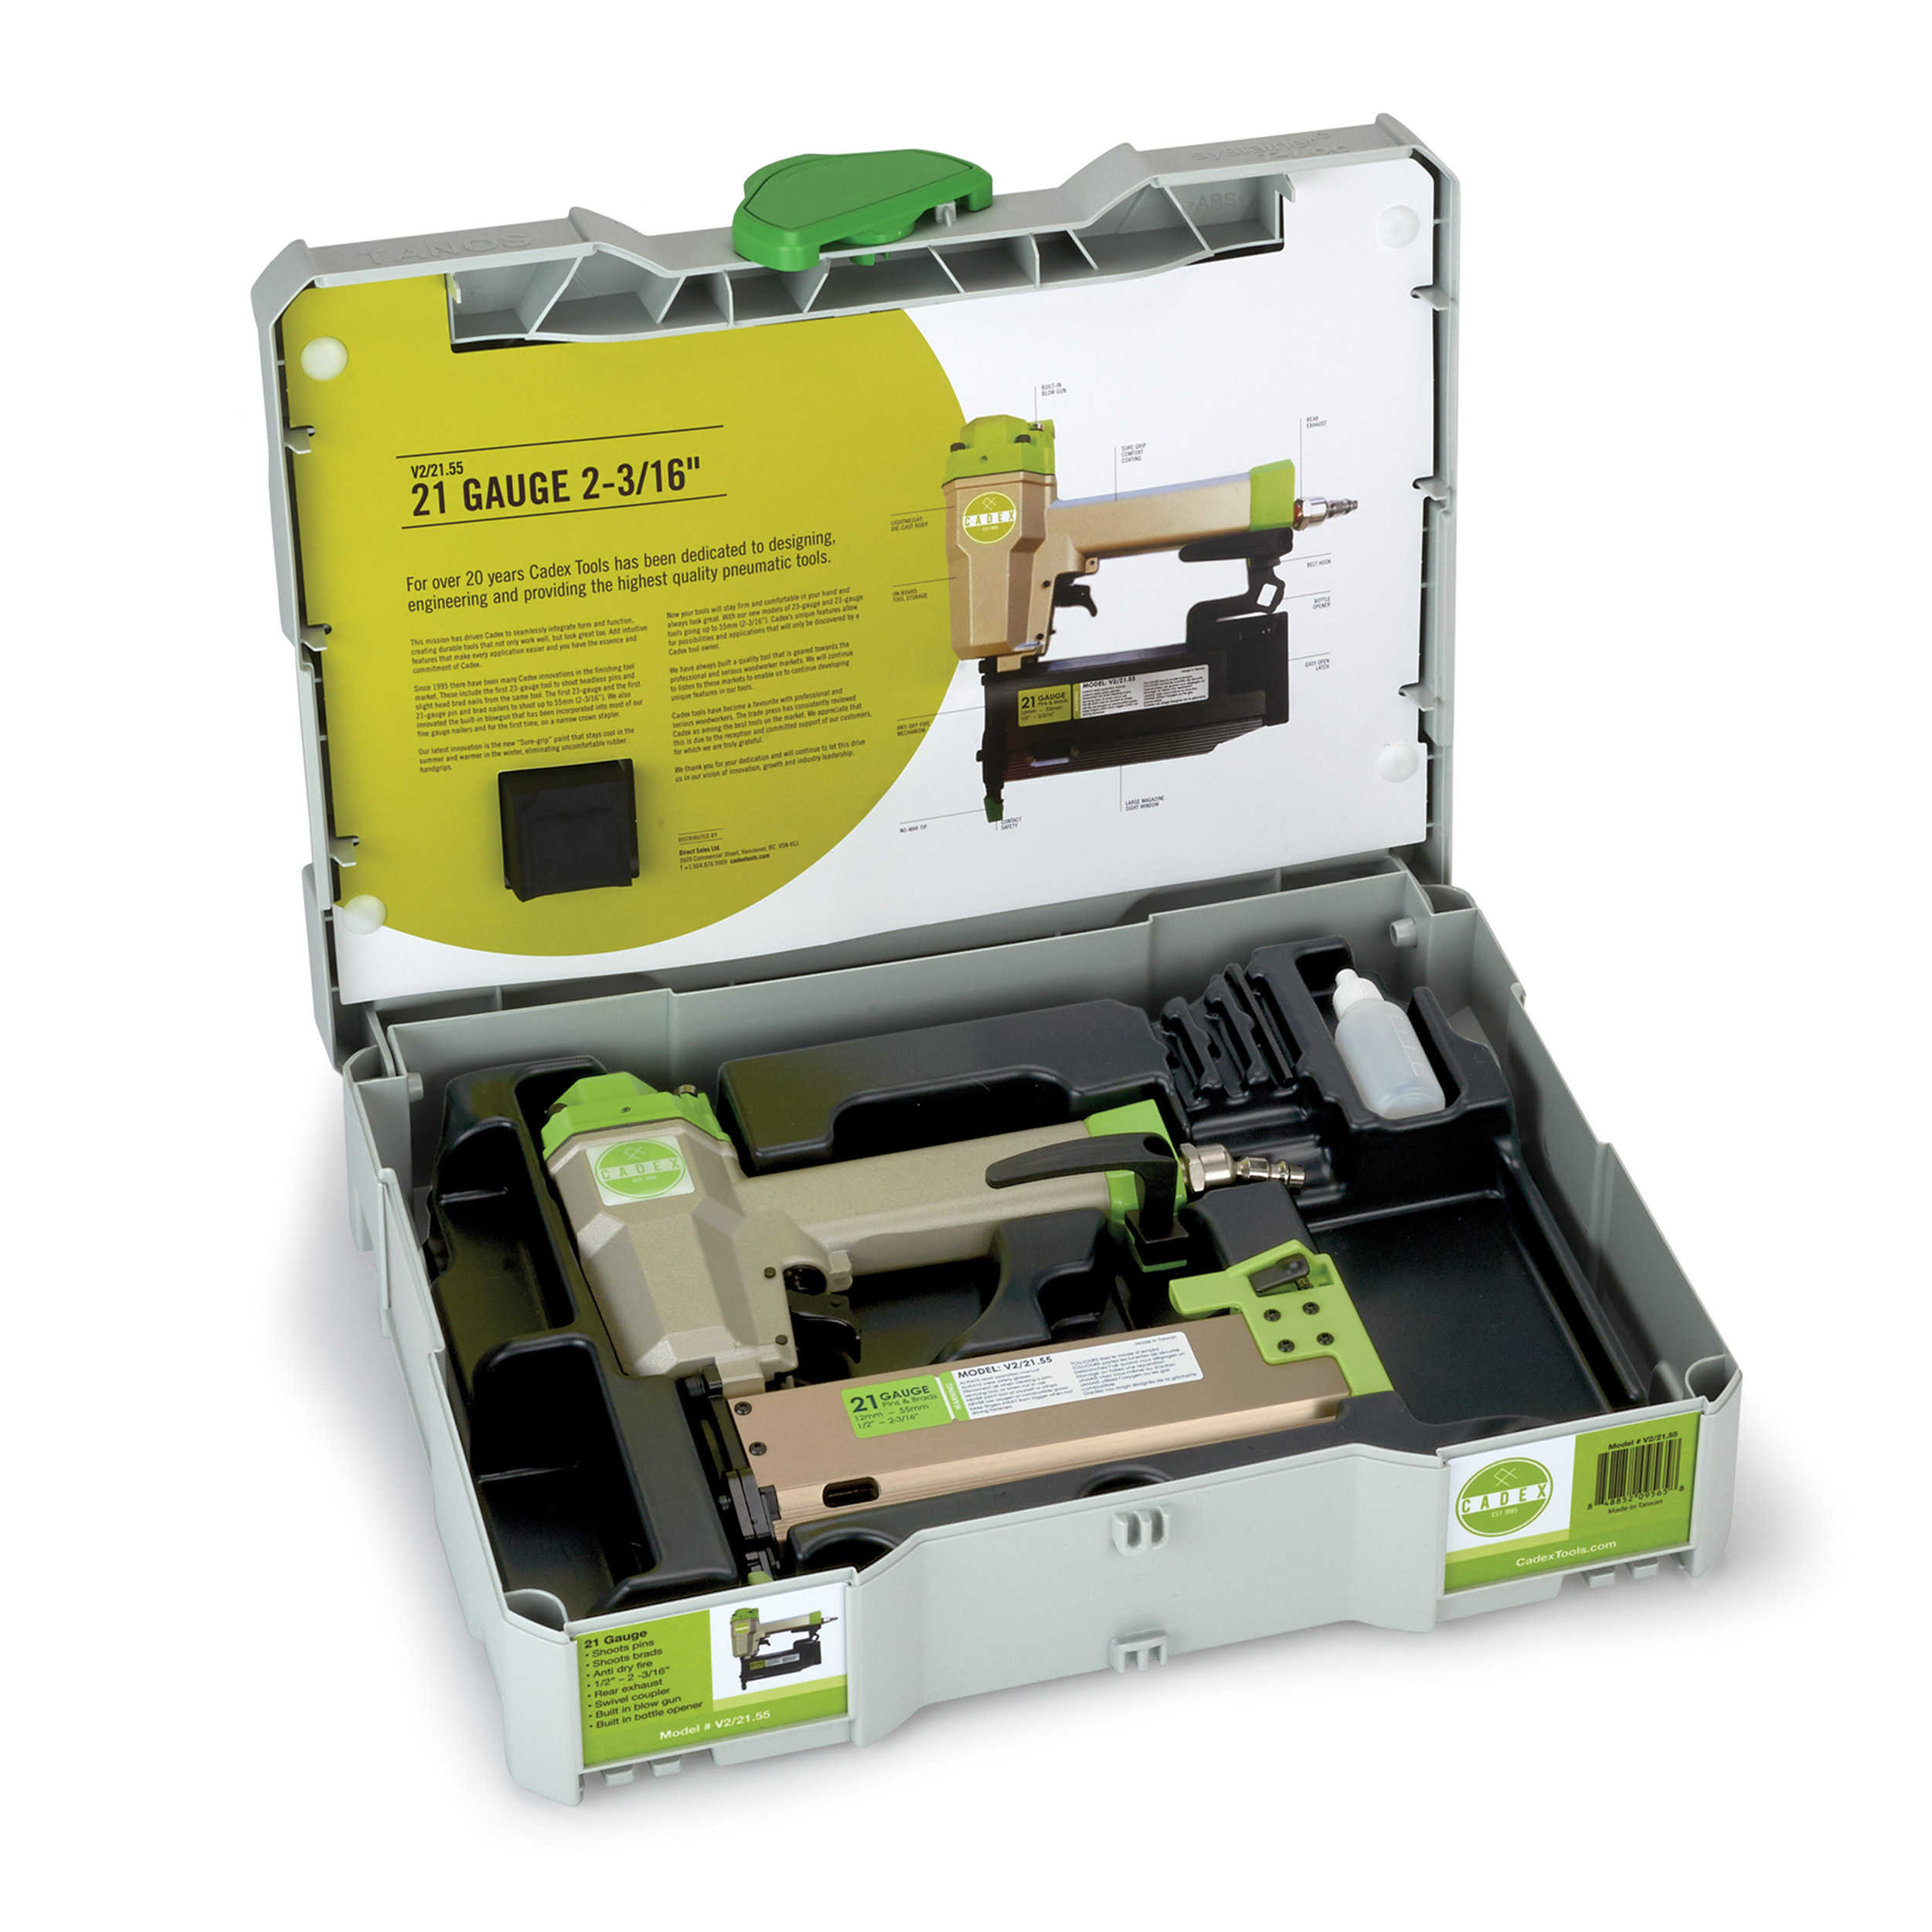 Cadex 21 Gauge, 2-3/16' Combination Pinner/Brad Nailer - with Systainer Case